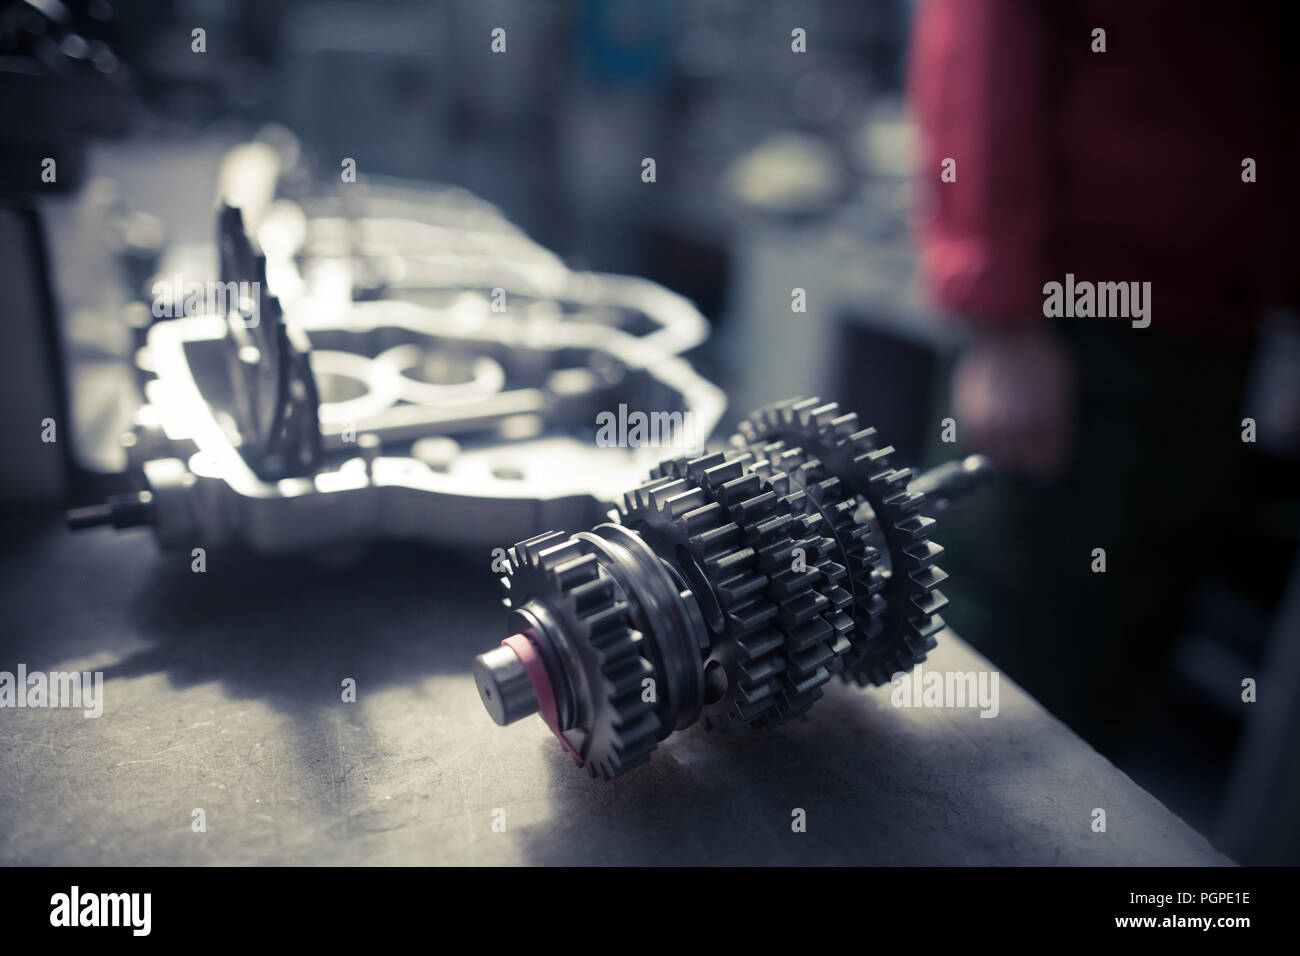 Metal gears from a motorcycle gear box. Stock Photo